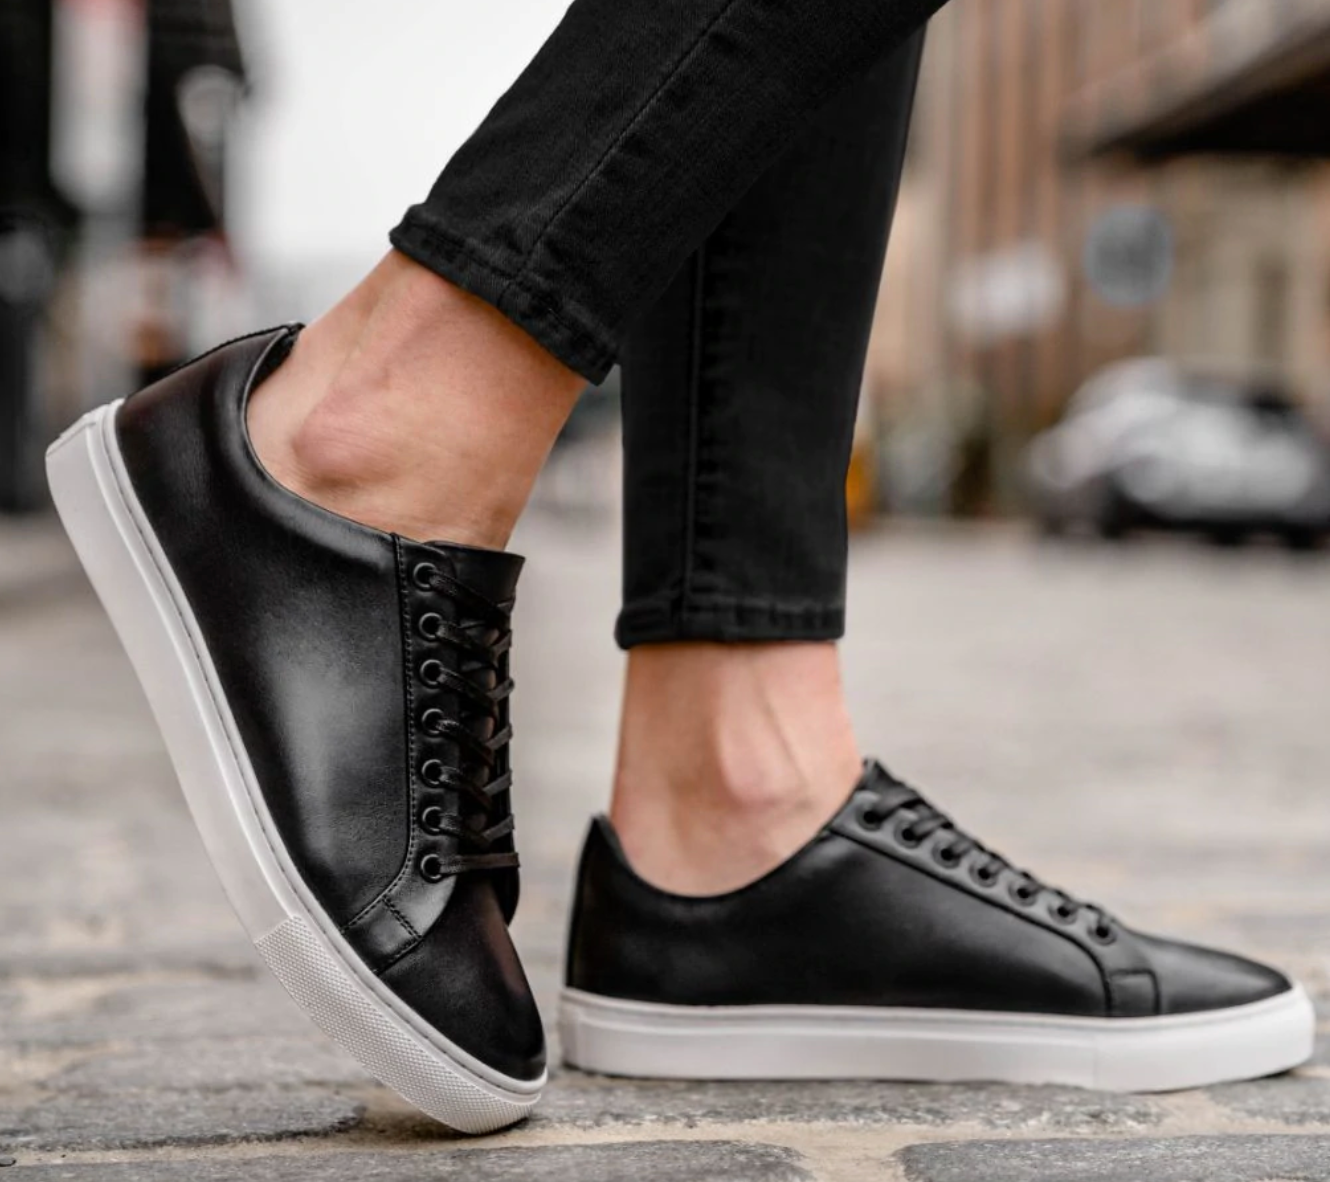 Model is wearing the black leather low top sneakers with white soles